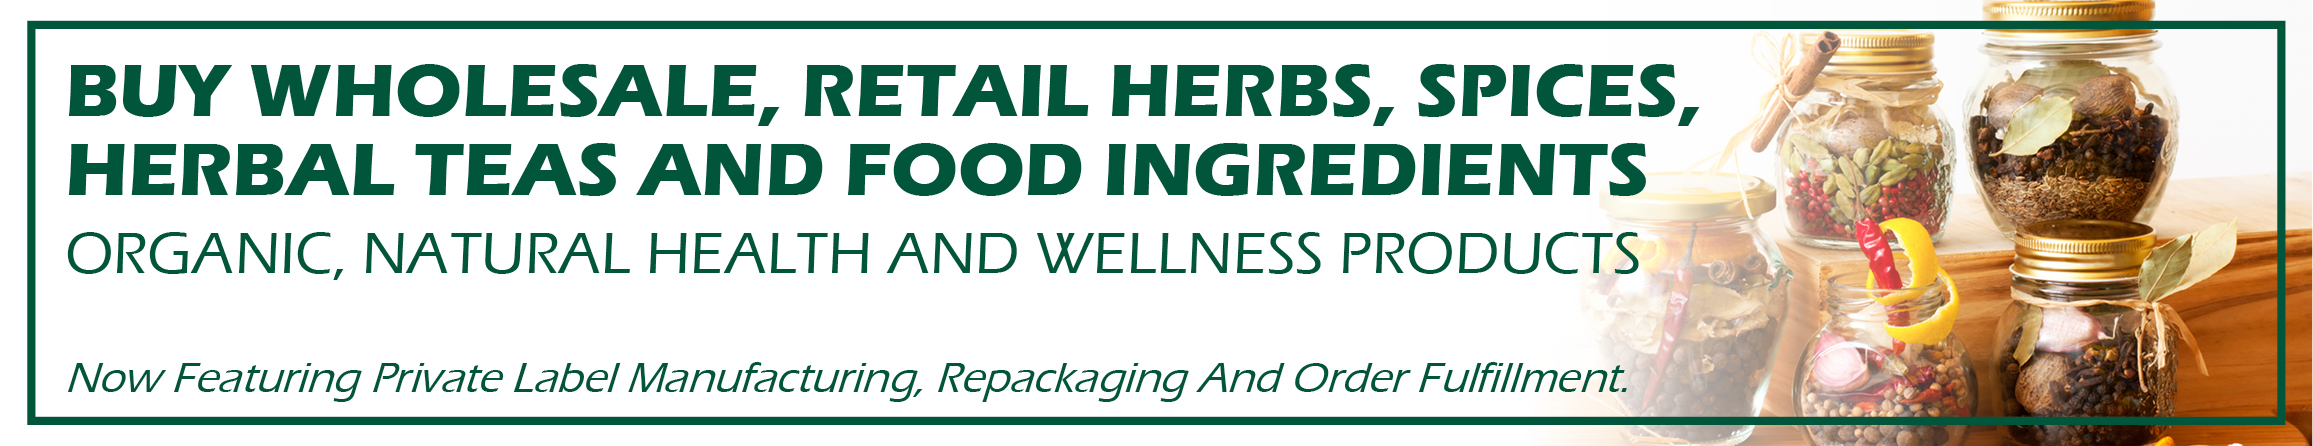 Buy wholesale, retail herbs, spices, herbal teas and food ingredients. Now featuring private label manufacturing, repackaging and order fulfillment.